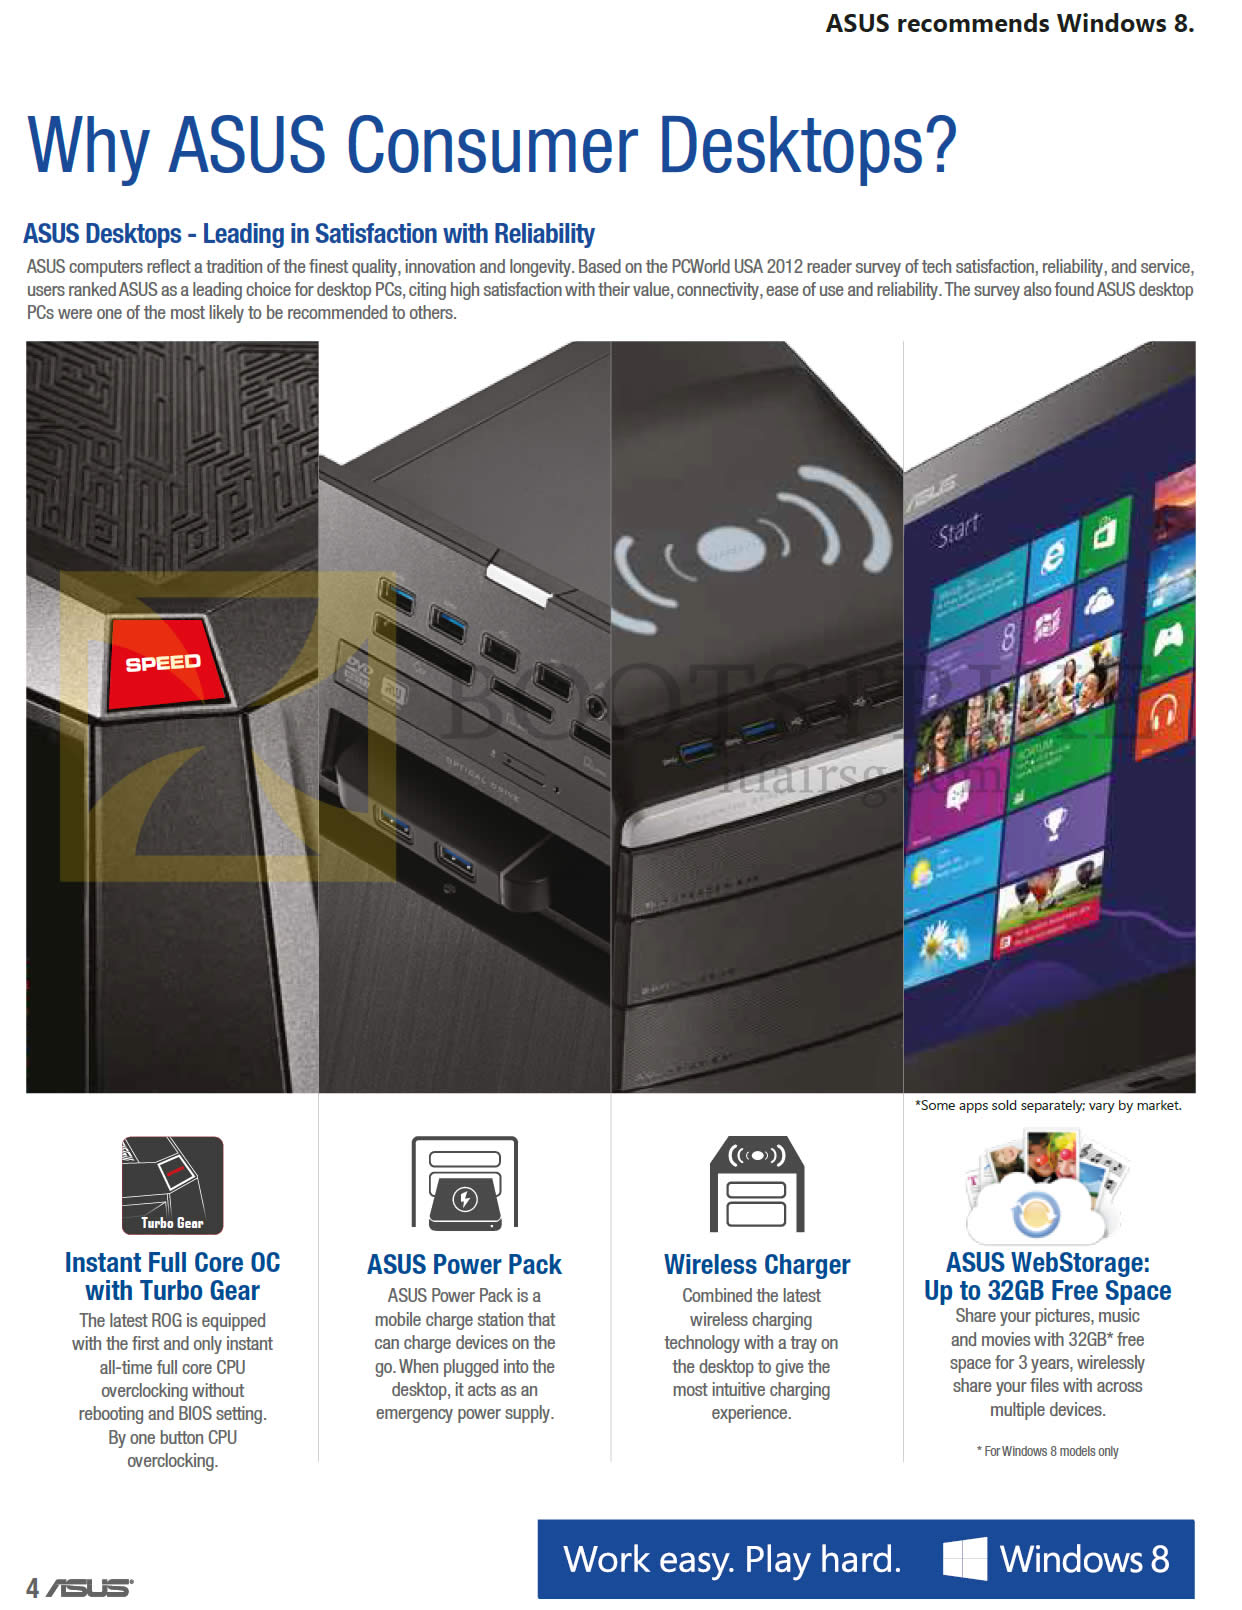 SITEX 2013 price list image brochure of ASUS Why ASUS Consumer Desktops, Wireless Charger, Power Pack, Webstorage